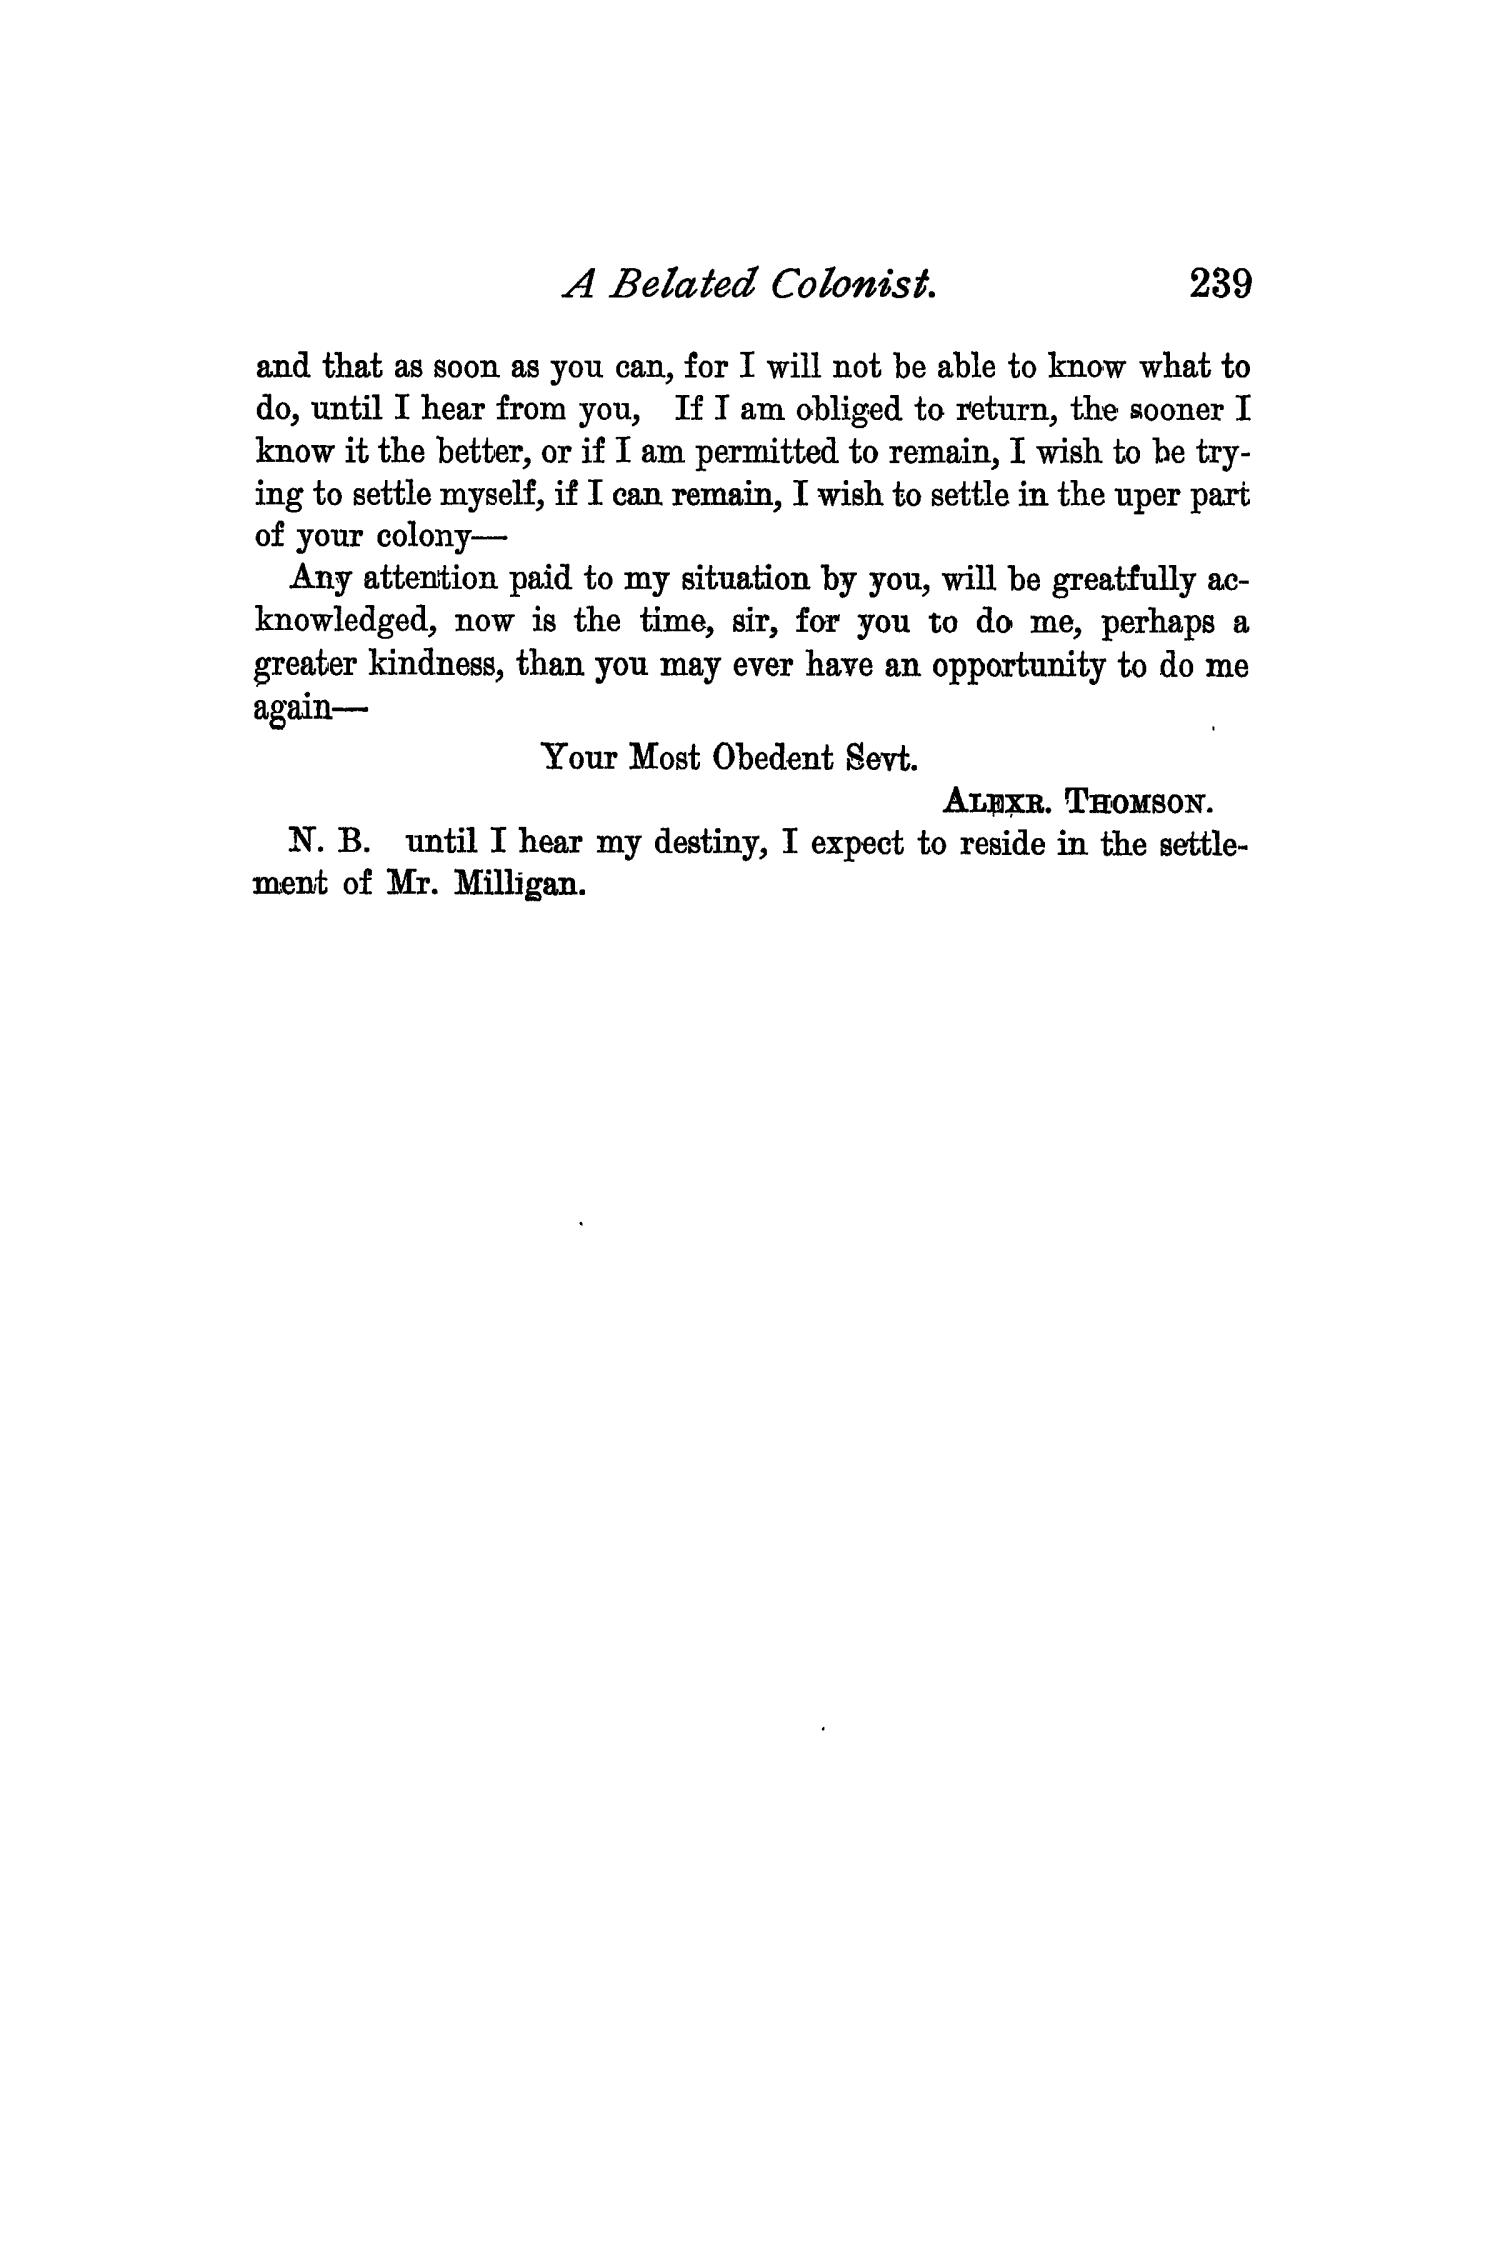 The Quarterly of the Texas State Historical Association, Volume 2, July 1898 - April, 1899
                                                
                                                    239
                                                